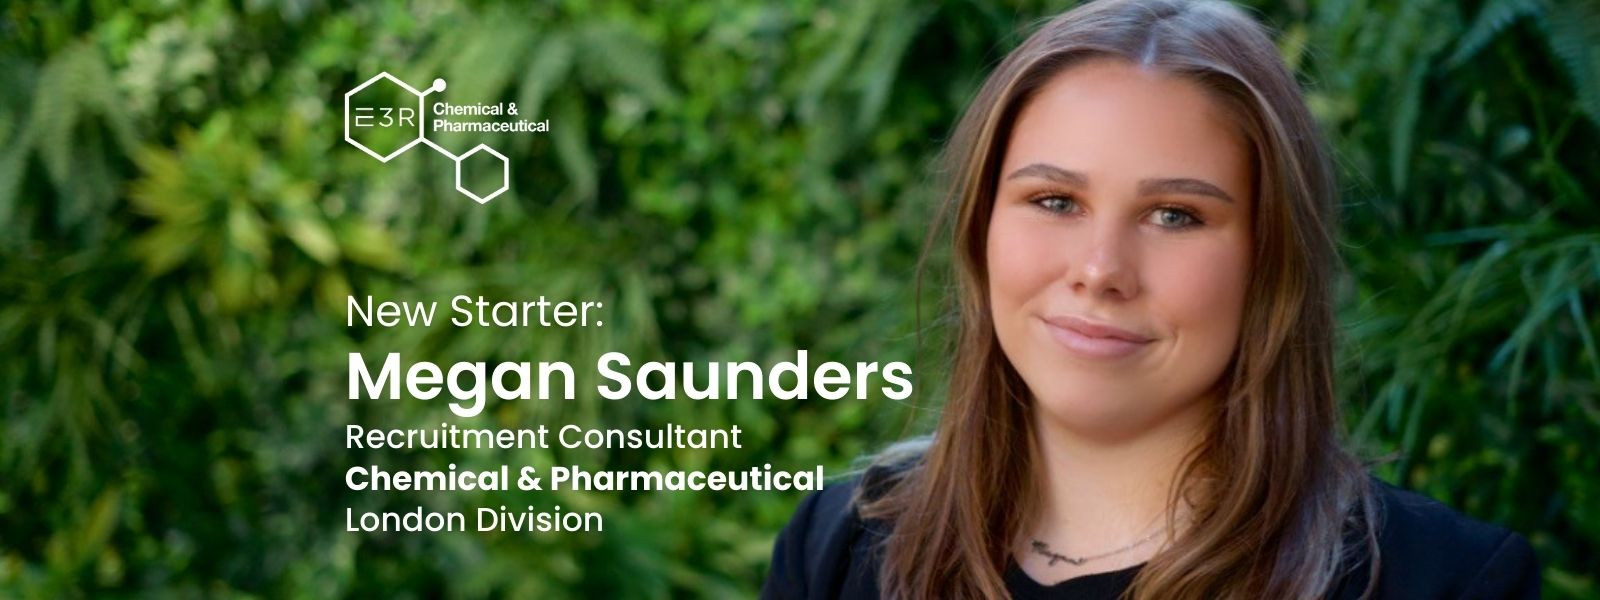 Chemical & Pharmaceutical team welcomes new Recruitment Consultant, Megan Saunders